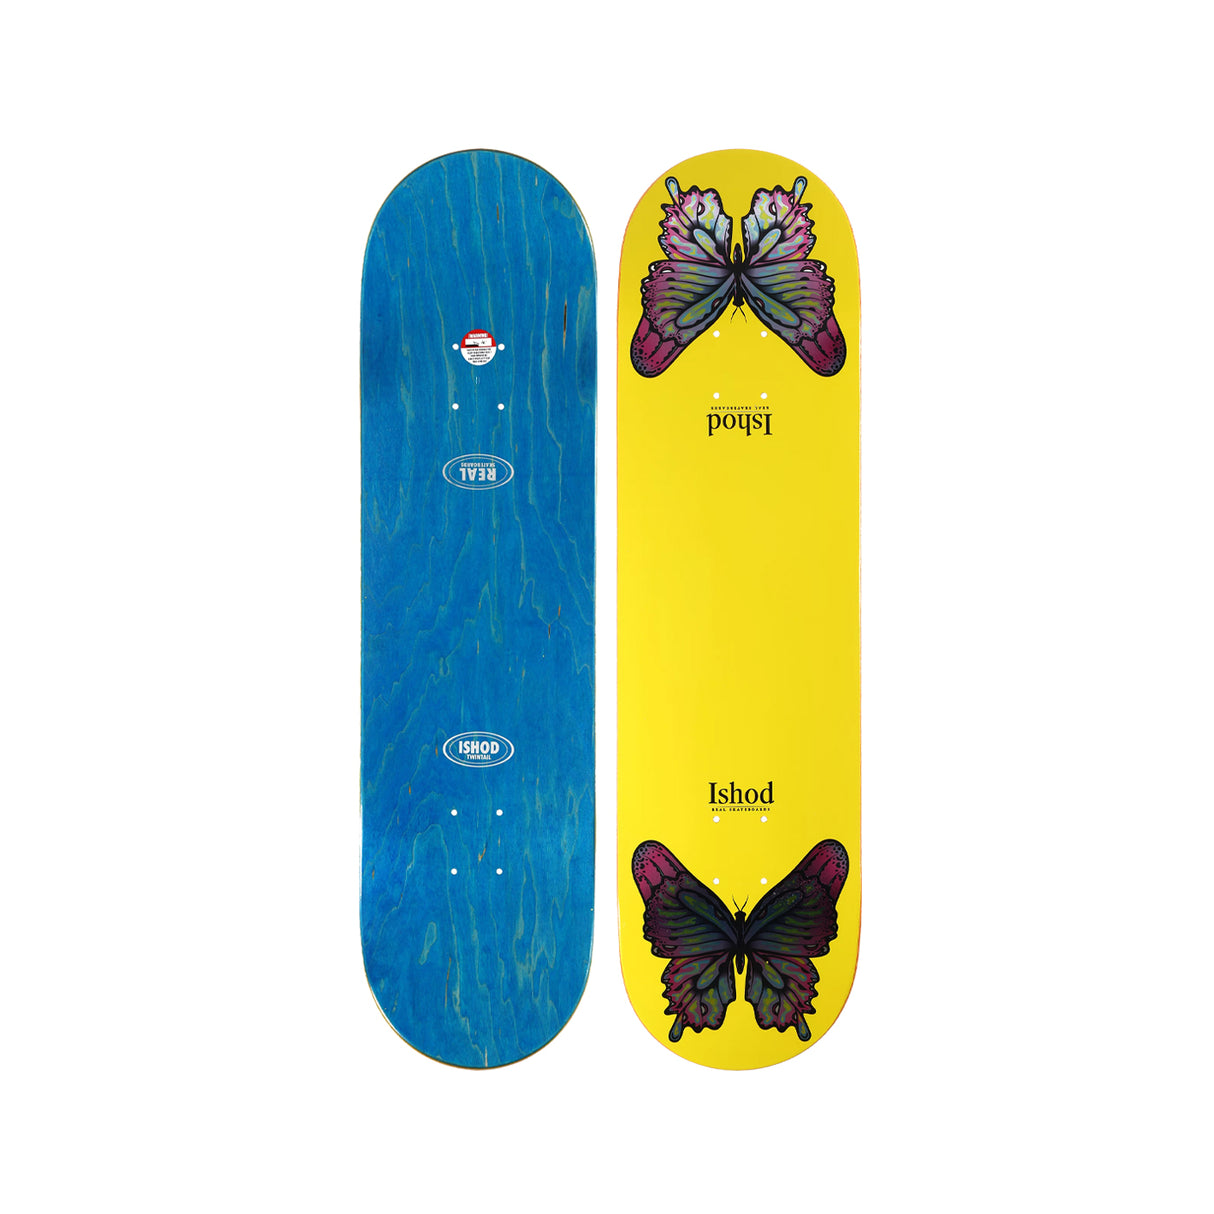 Real Ishod Monarch Twin Tail 8.5 x 32.2 Deck w/ Pepper Grip